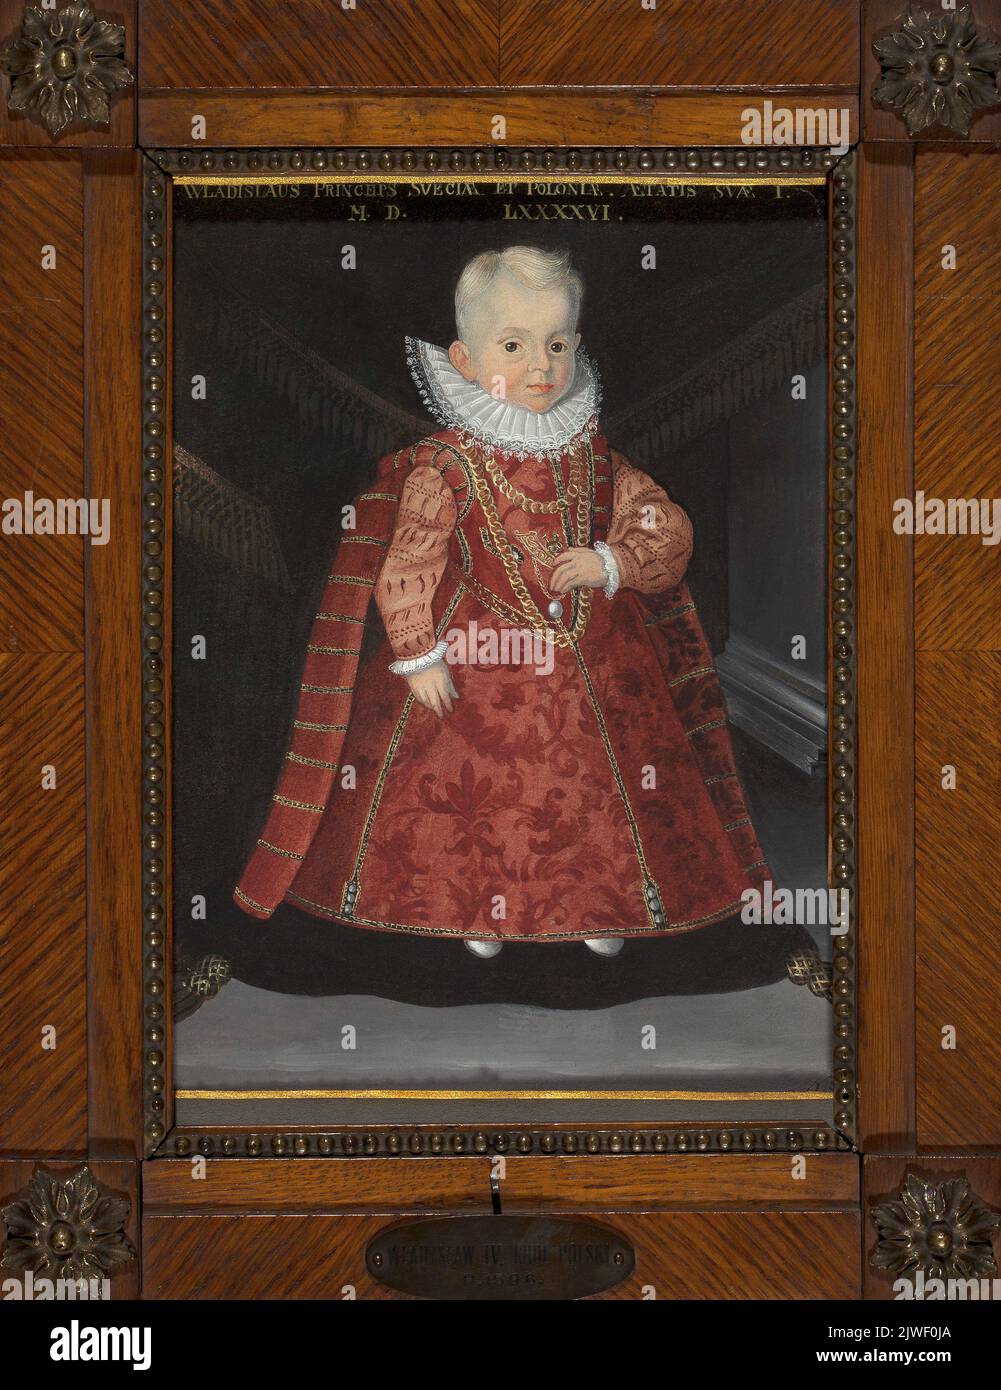 Portrait of Władysław IV Vasa as a Child, after a portrait from 1596, from the collections of Germanische Nationalmuseum in Nuremberg. Zinn, Karl (ante 1860-1889), painter Stock Photo